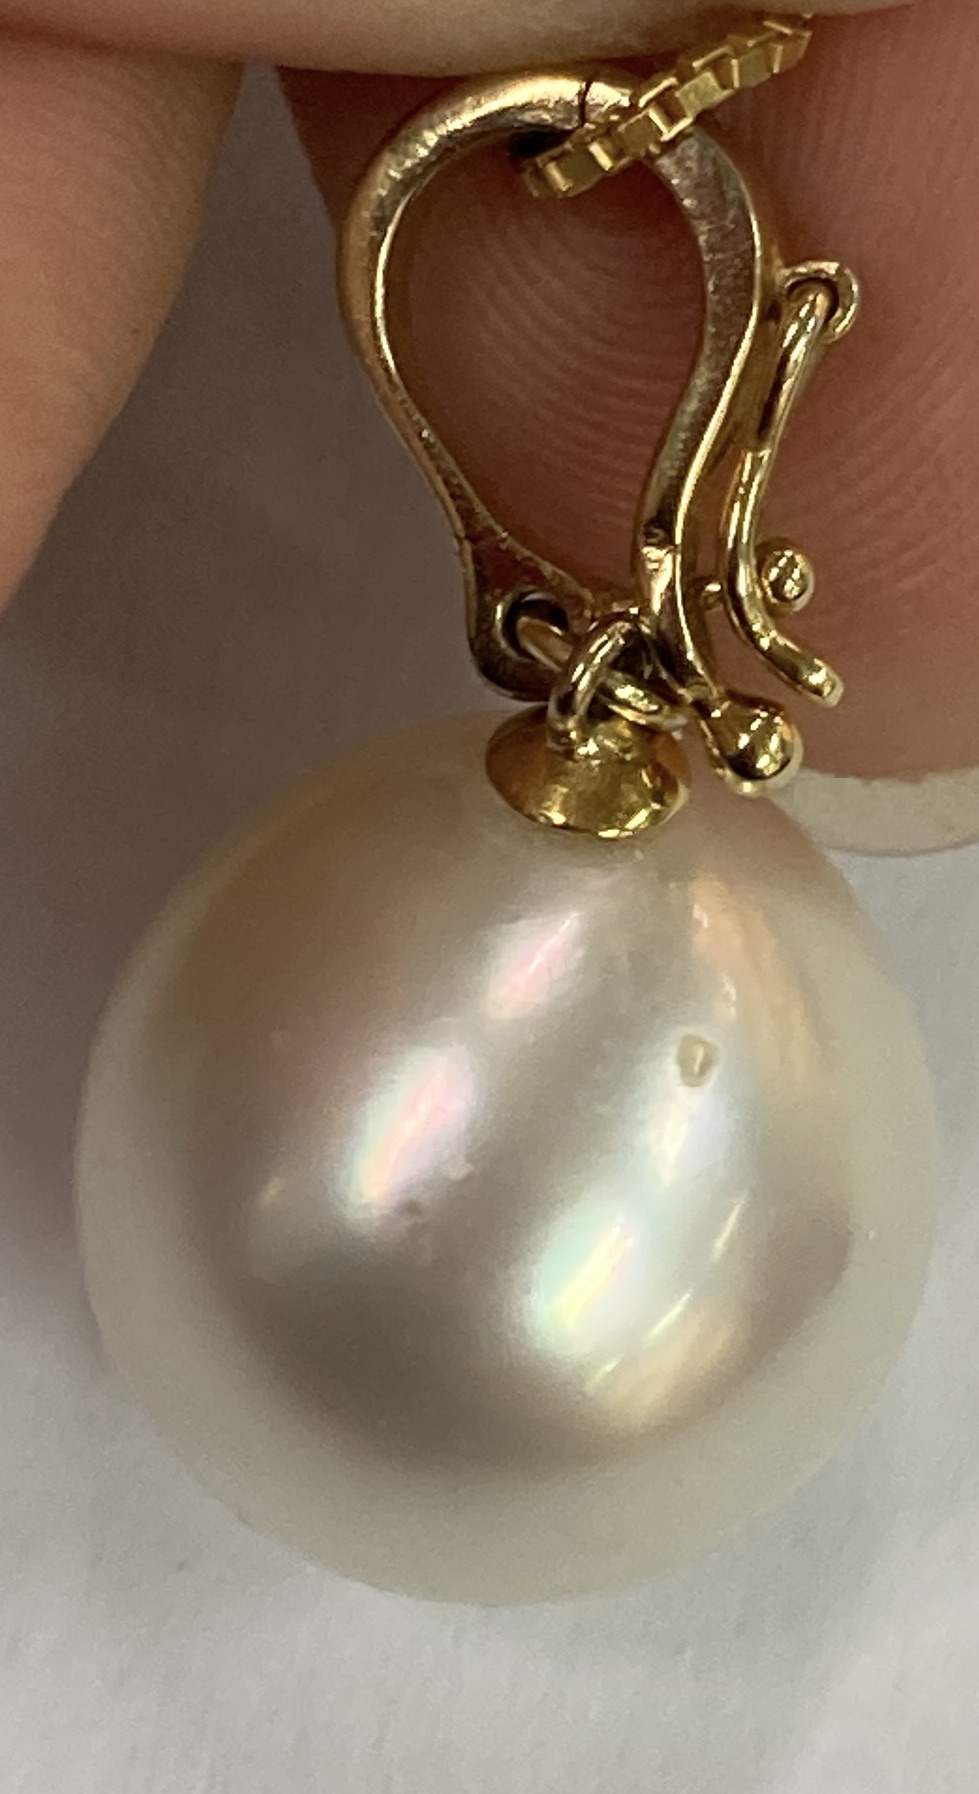 AN OFF-ROUND CULTURED SOUTH SEA PEARL PENDANT ON CHAIN - Image 7 of 9